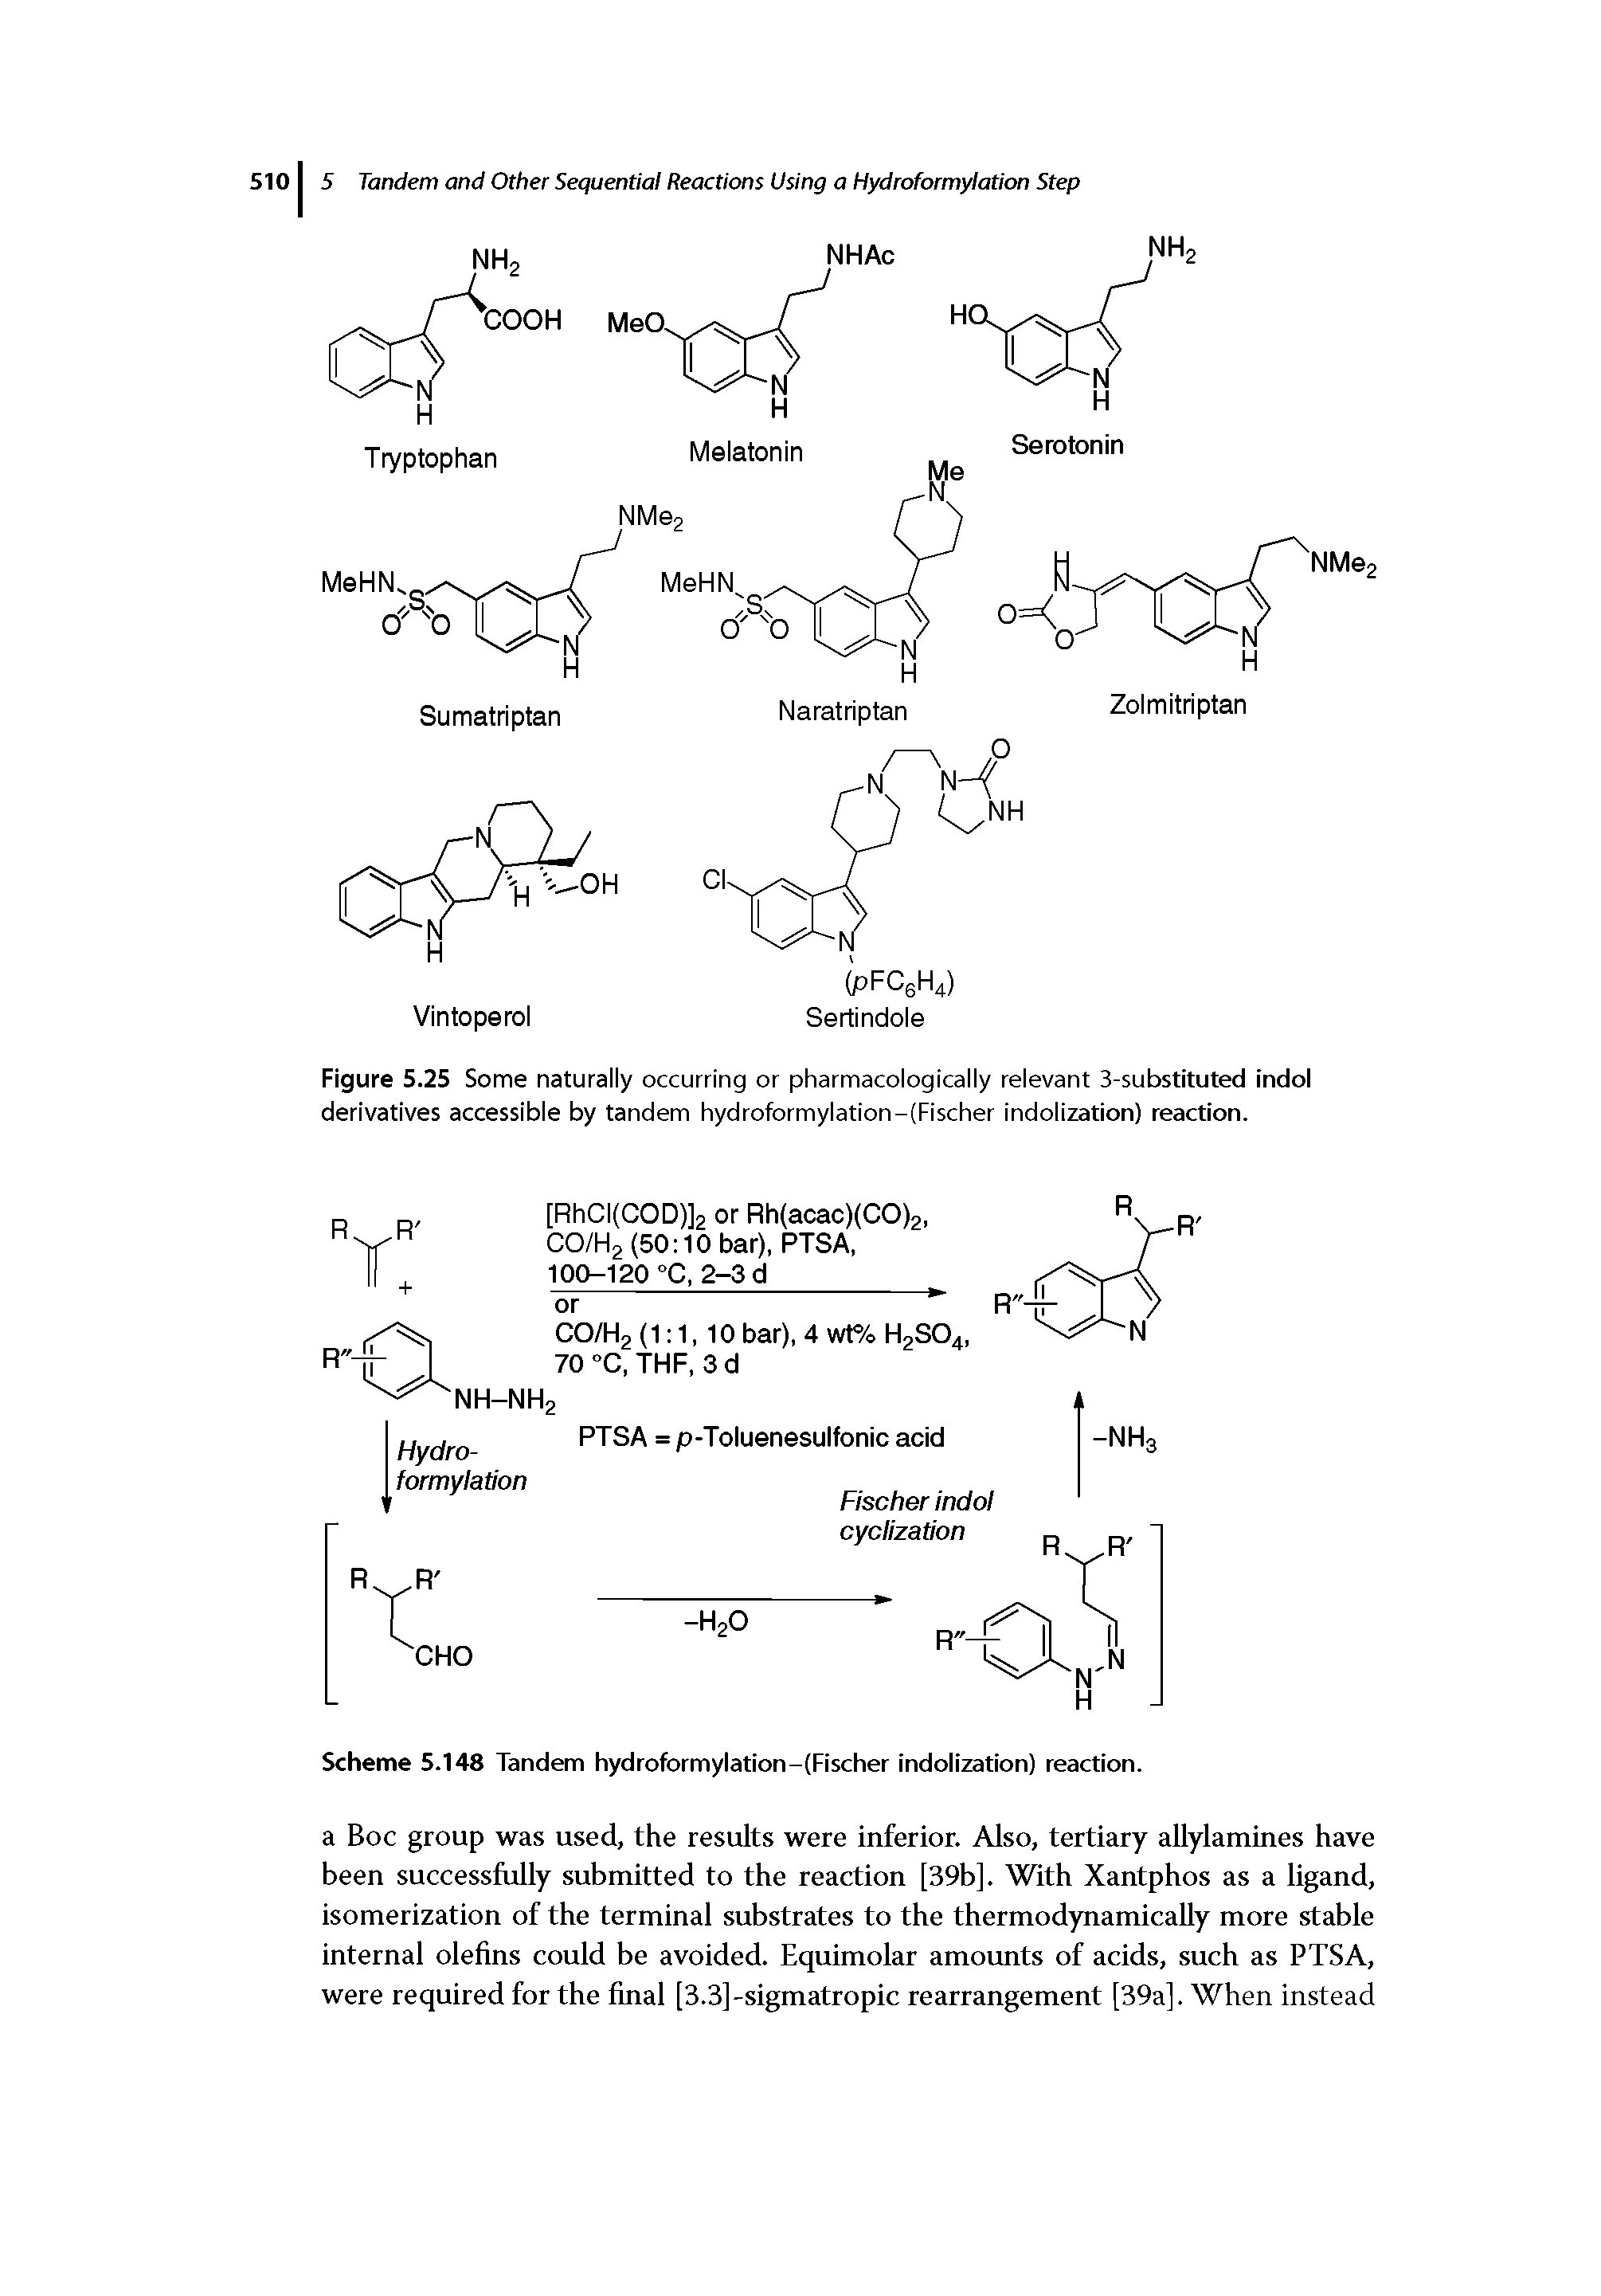 Figure 5.25 Some naturally occurring or pharmacologically relevant 3-substituted indol derivatives accessible by tandem hydroformylation-(Fischer indolization) reaction.